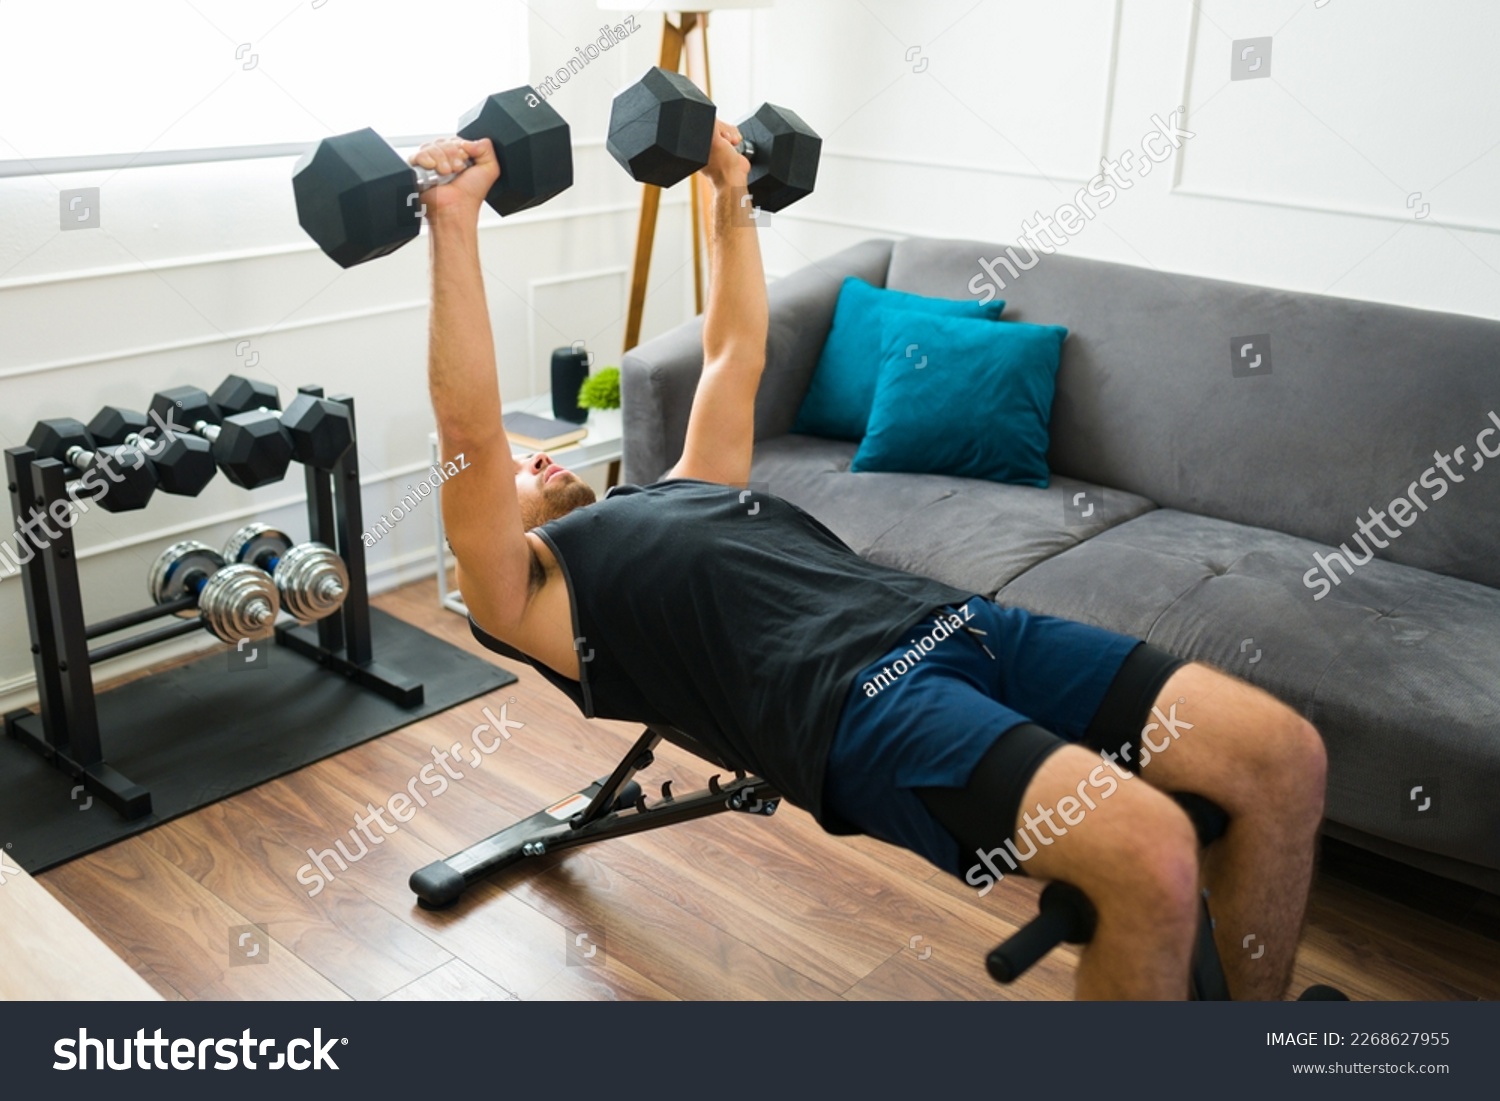 Strong fit man in his 20s with a home gym doing bench press exercises with dumbbell weights #2268627955